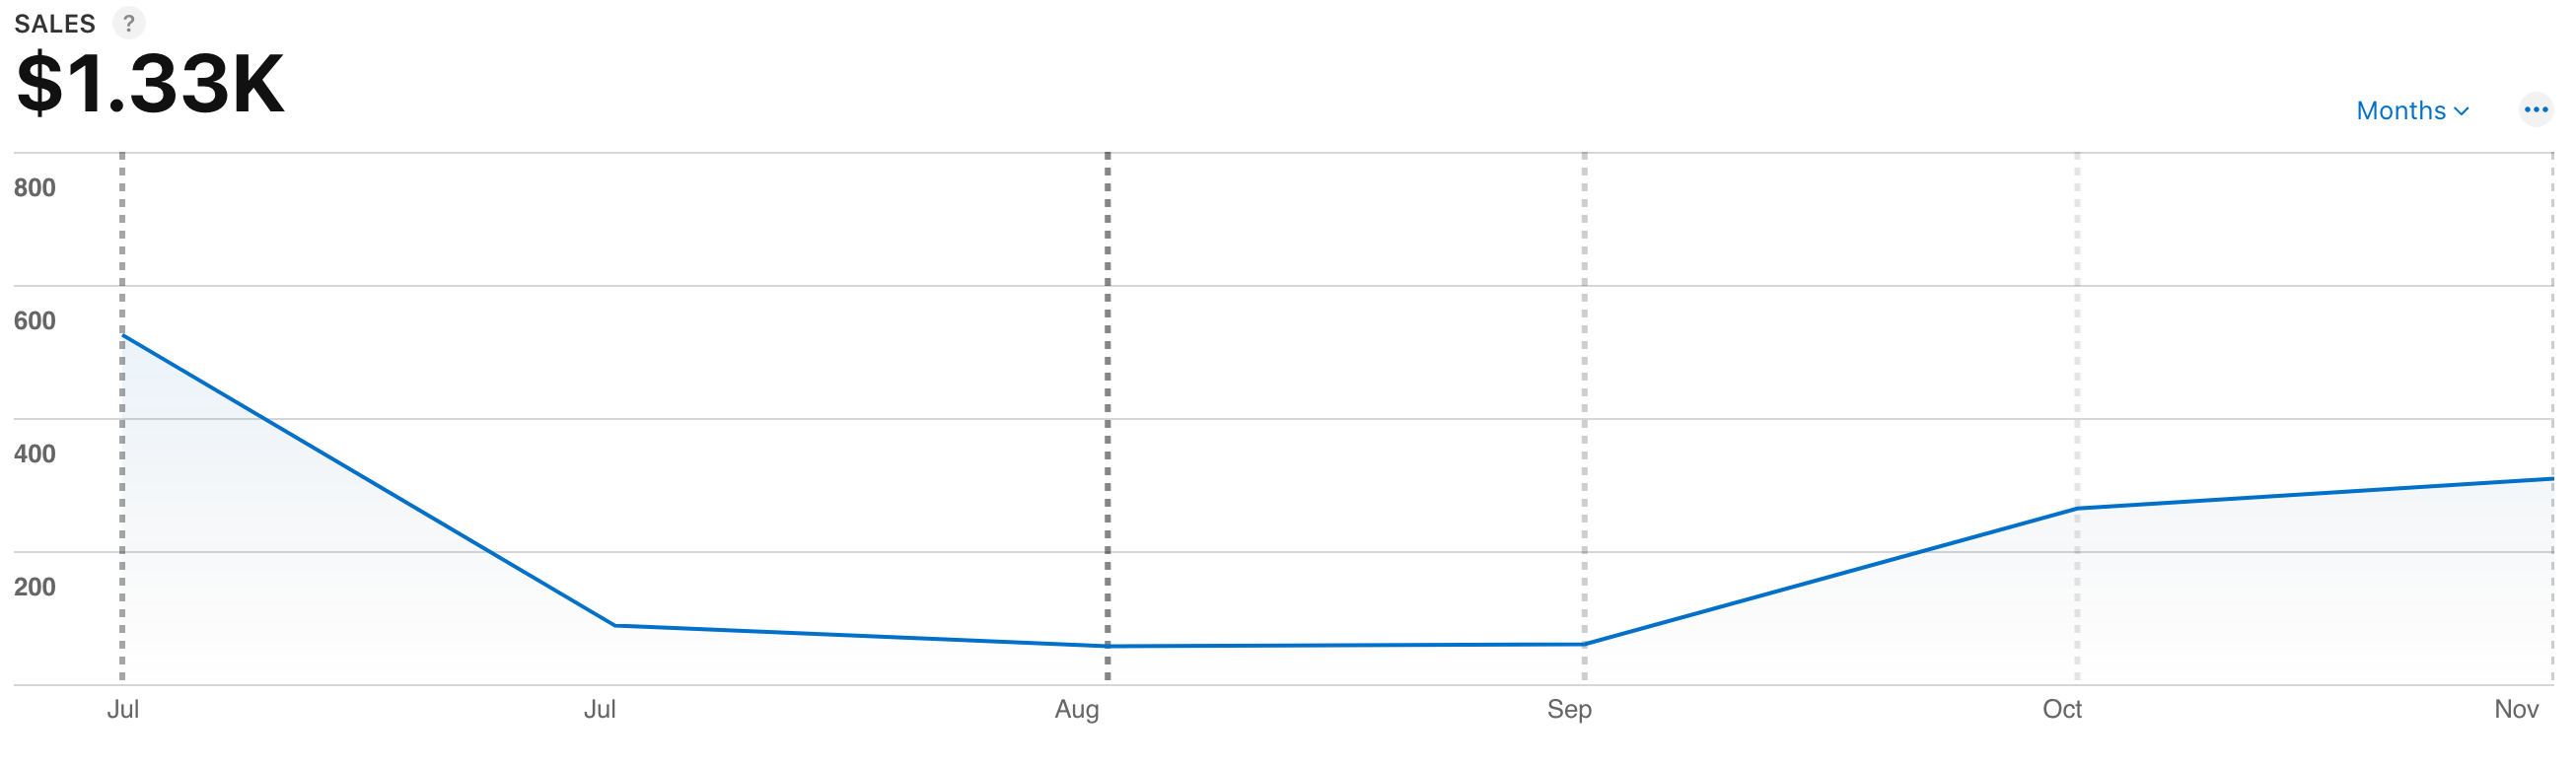 A graph showing the sharp decrease of revenue after launch and then the gradual, consistent increase every month since